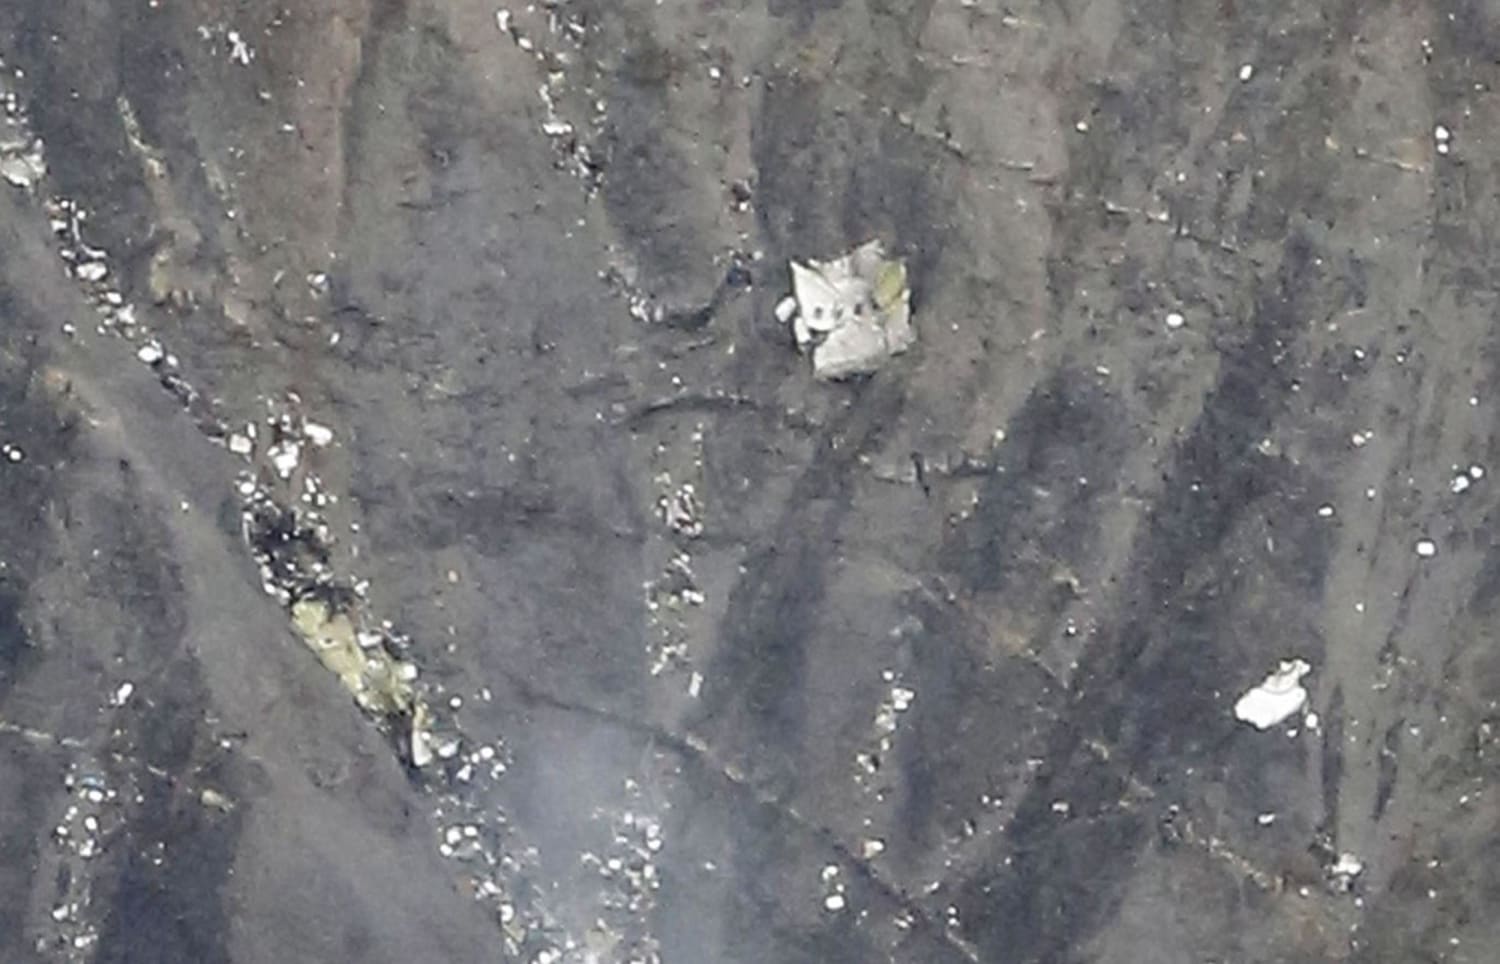 First Photos Emerge of Germanwings Crash Site in French Alps - NBC.